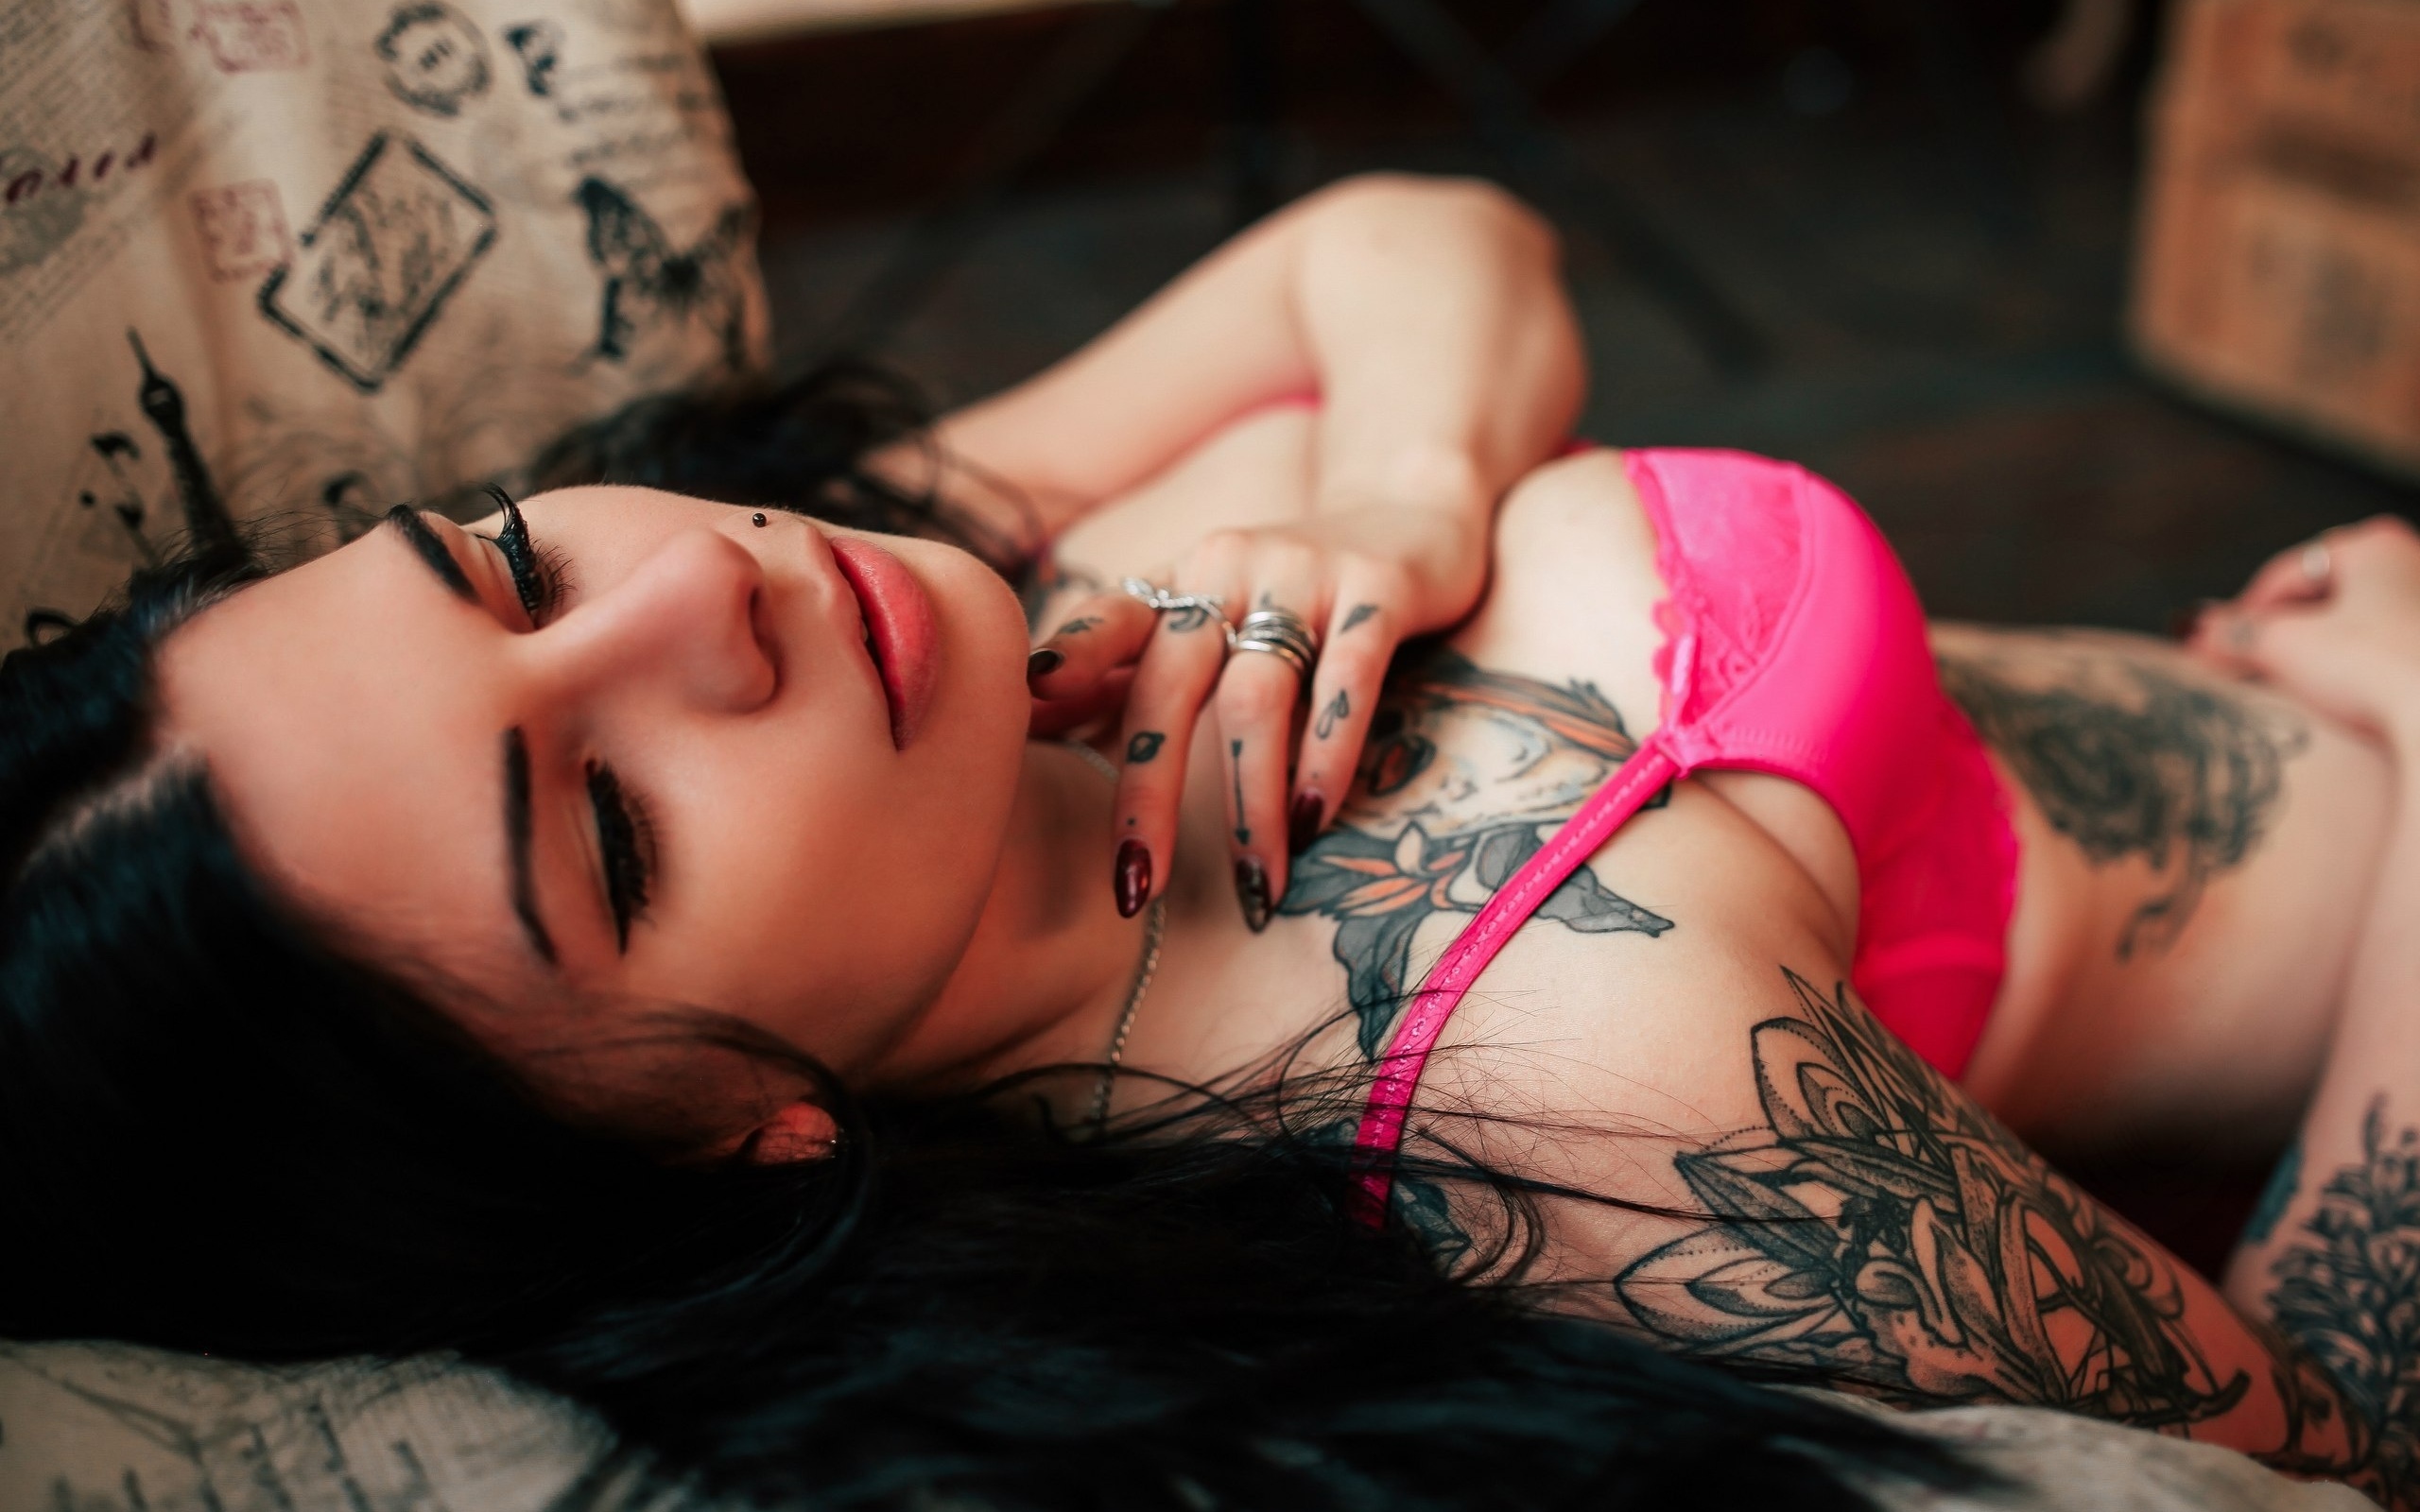 Girls With Tattoos Getting Fucked